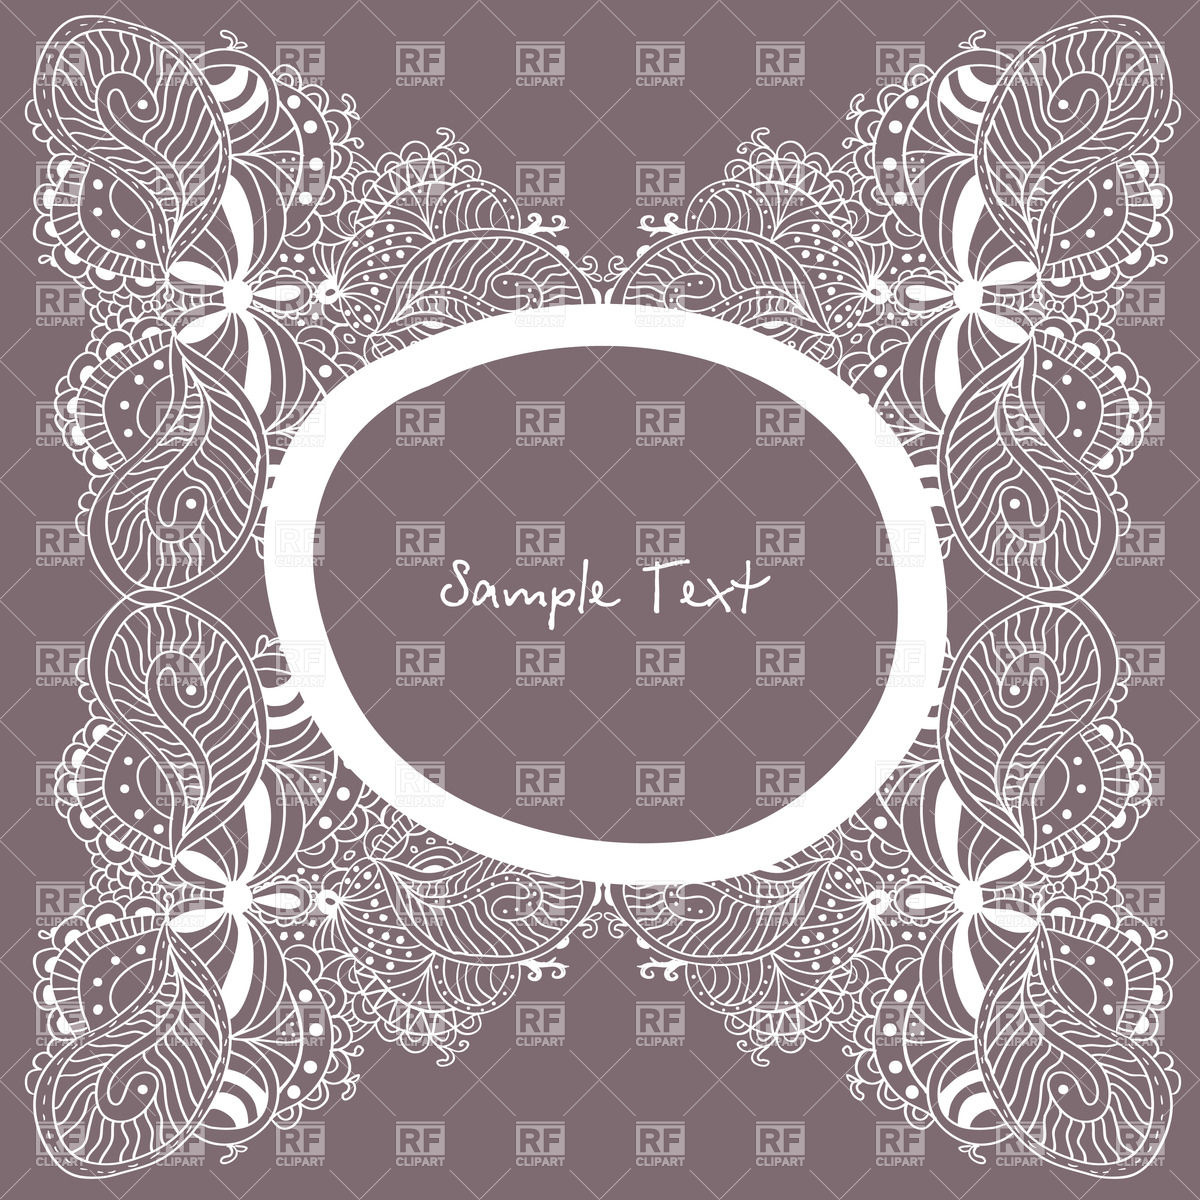 Vintage Round Frame With Ornate Lace Elements Download Royalty Free